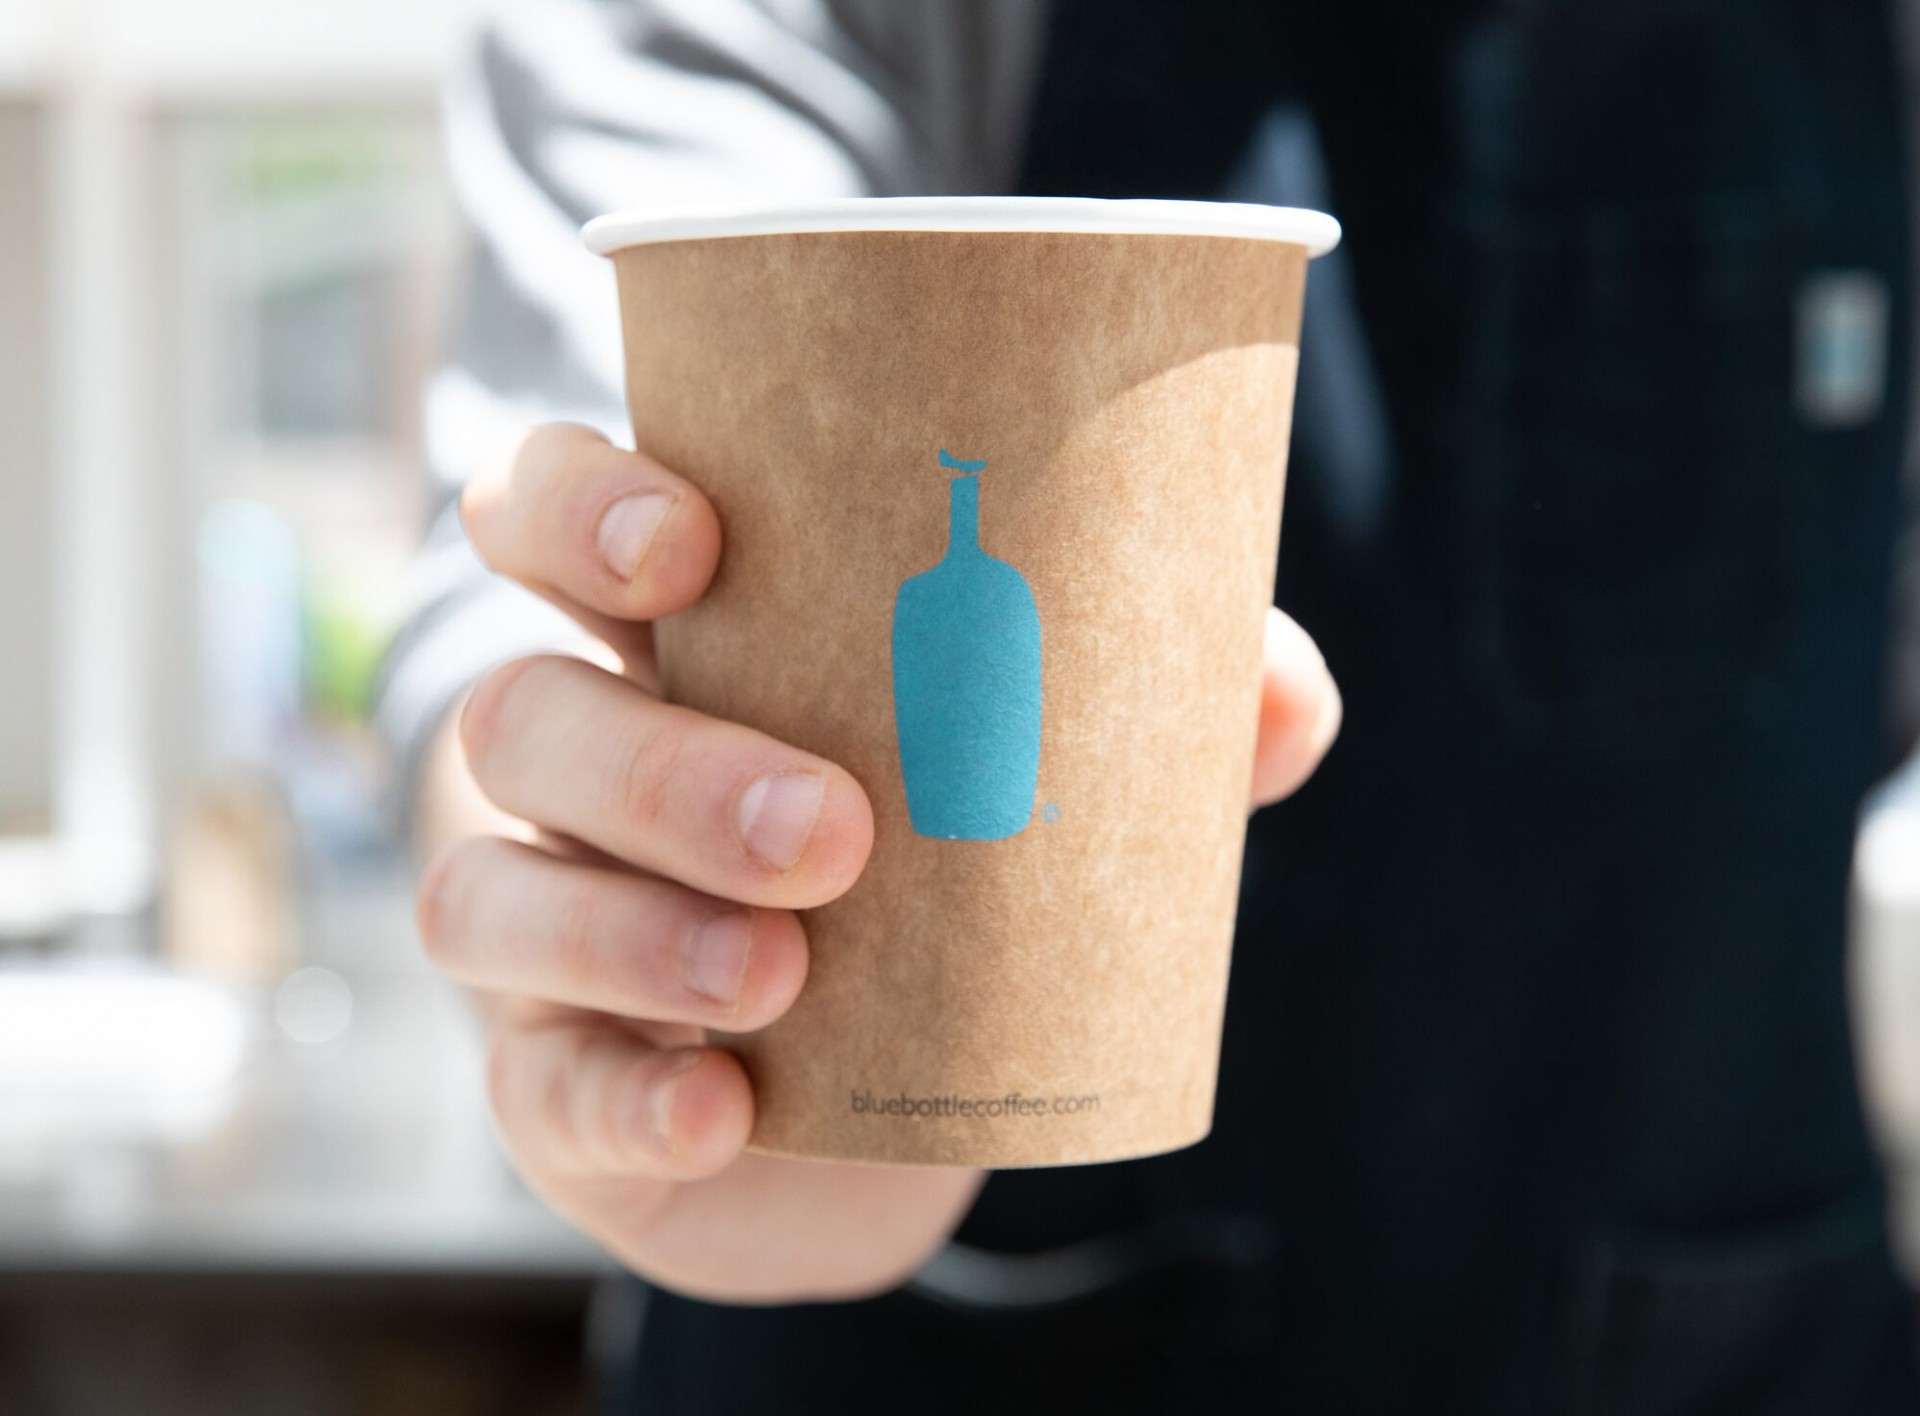 A hand holding a Blue Bottle Coffee